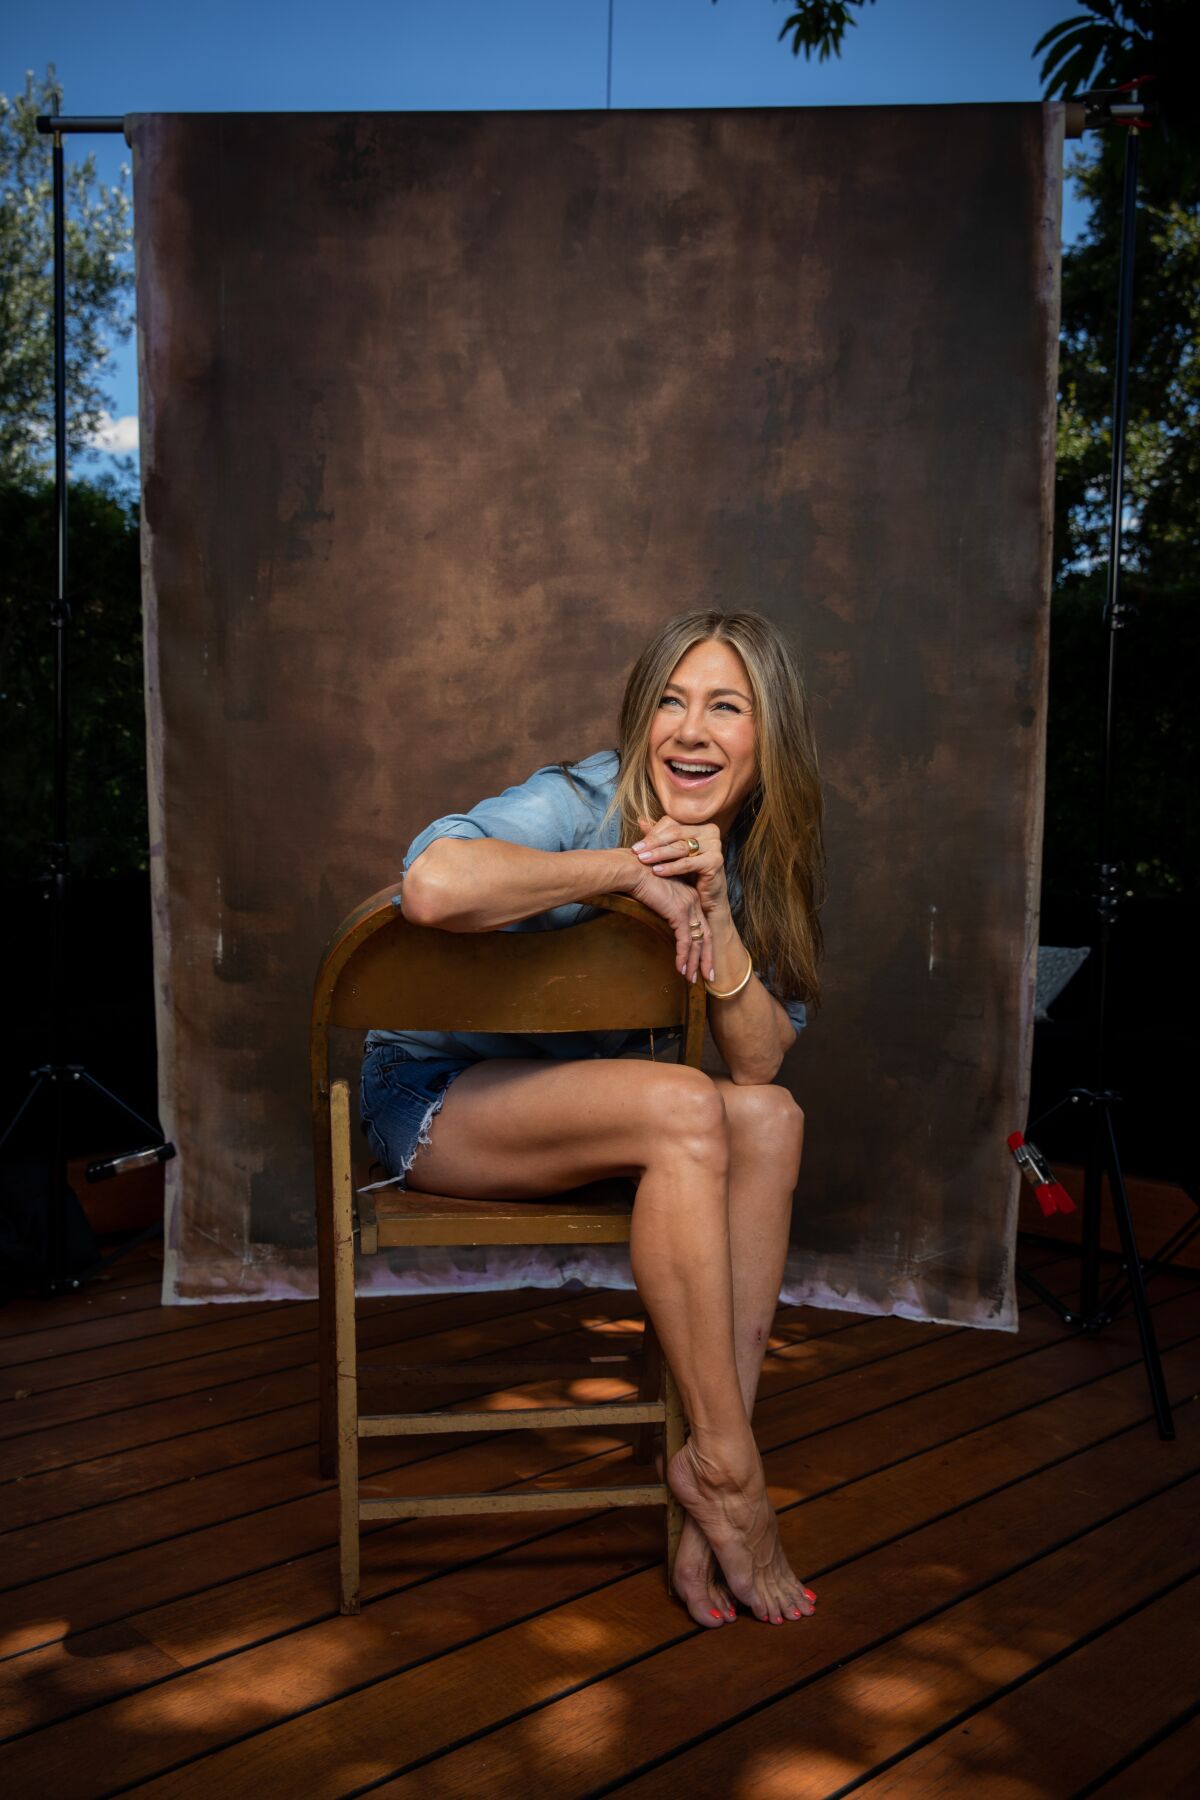  Jennifer Aniston sitting backward in a folding chair and smiling